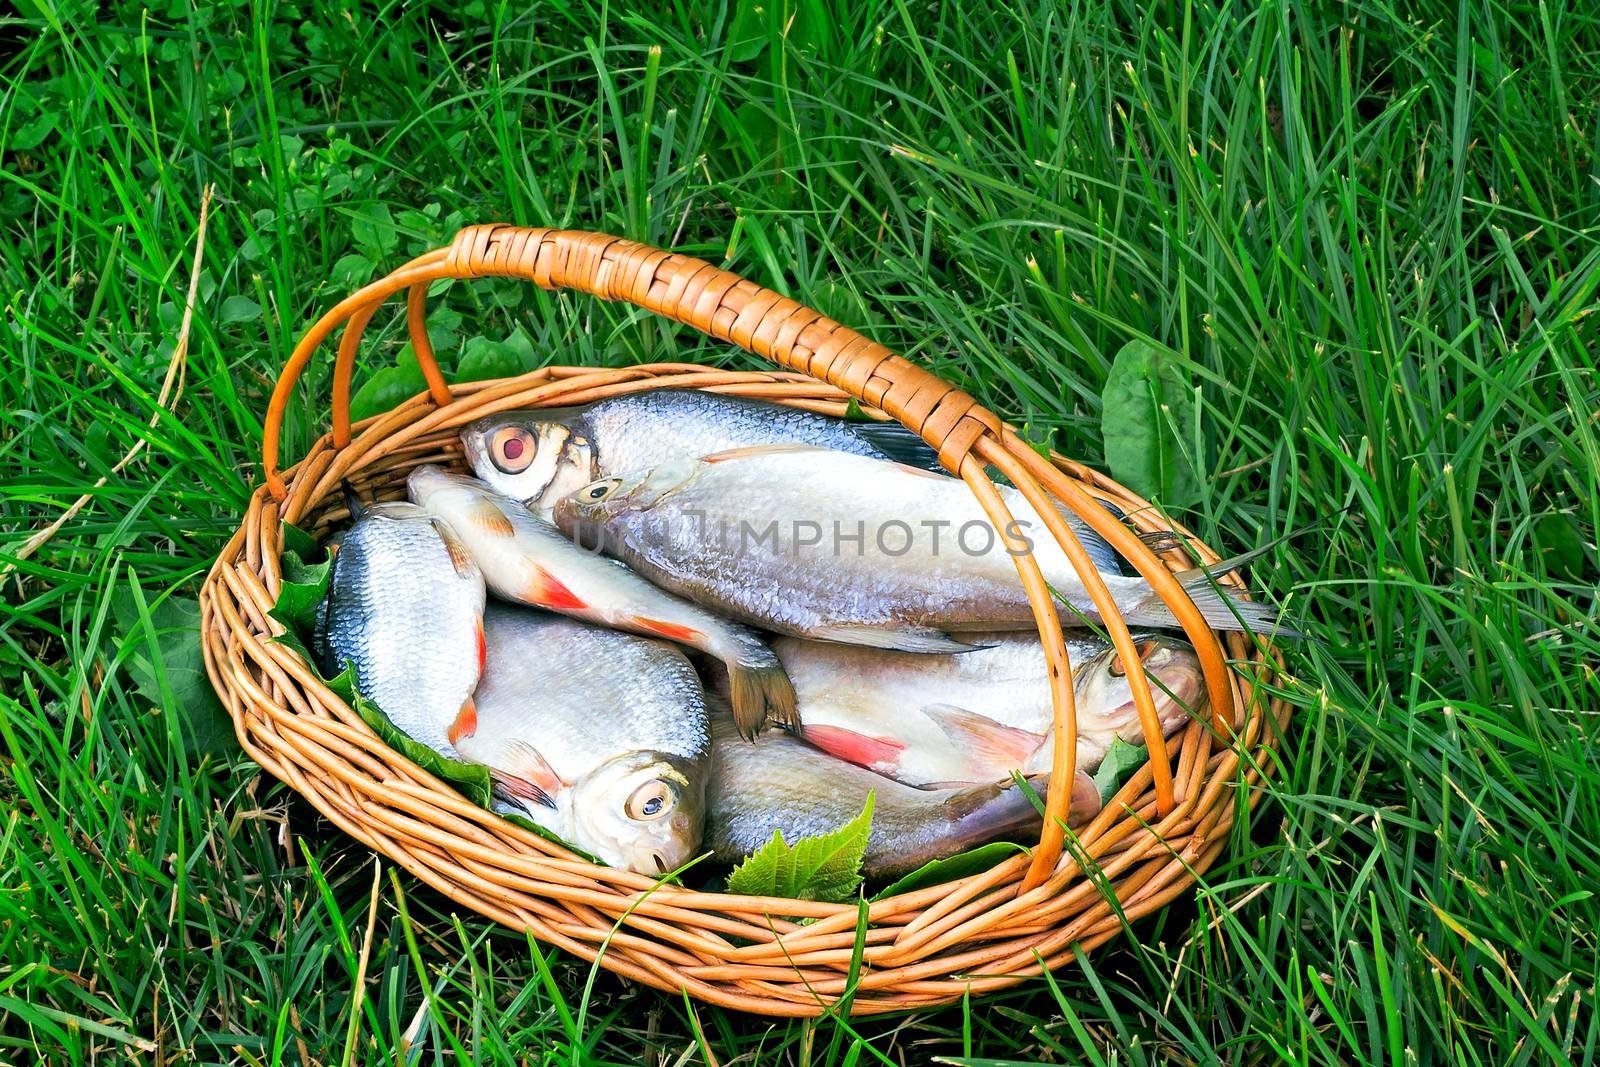 On a green grass the wattled basket with fish hooked in the river is situated on the bank of the river.